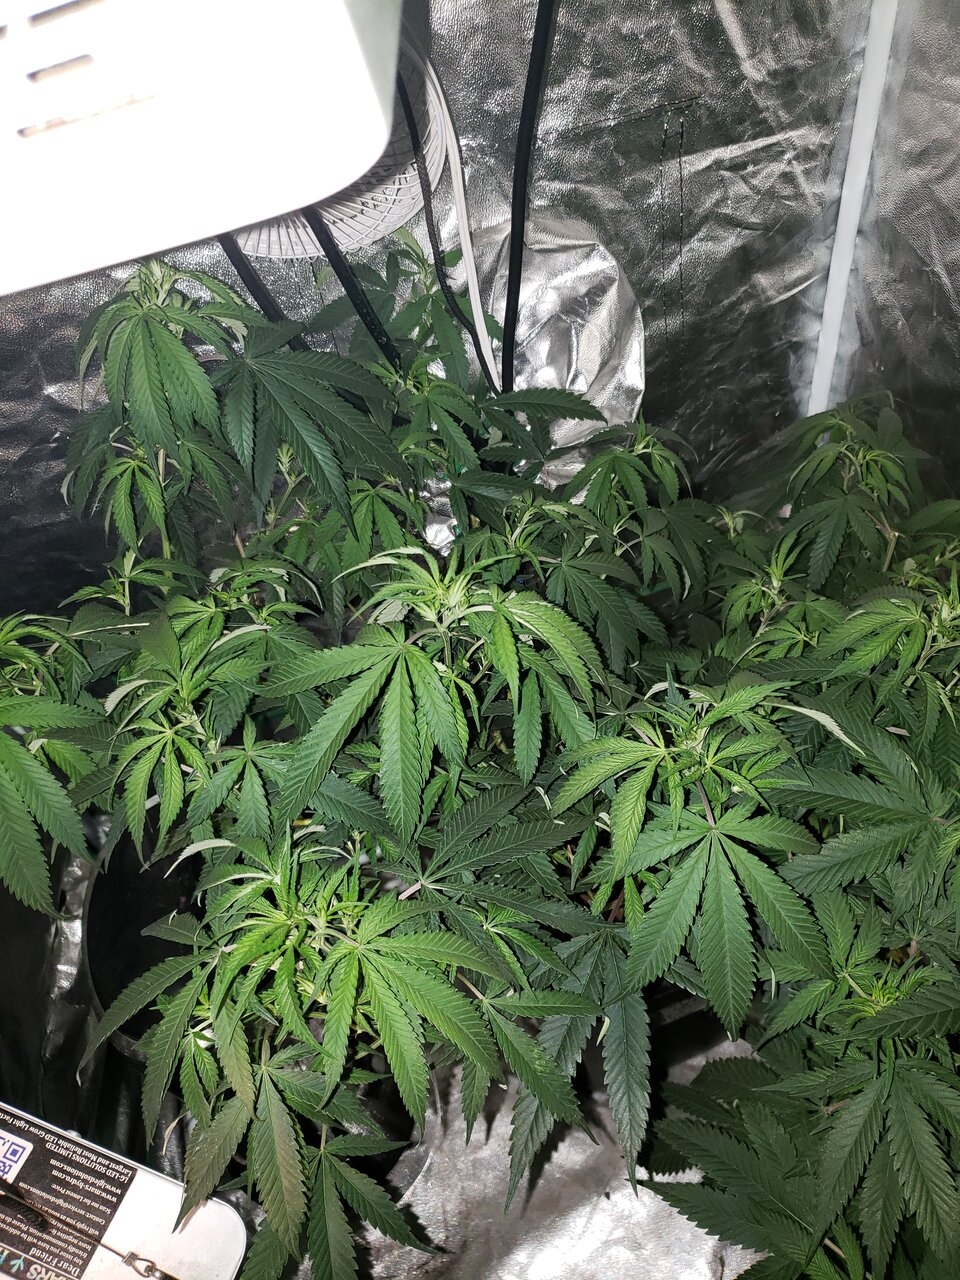 Sweet Tooth tall pheno in veg